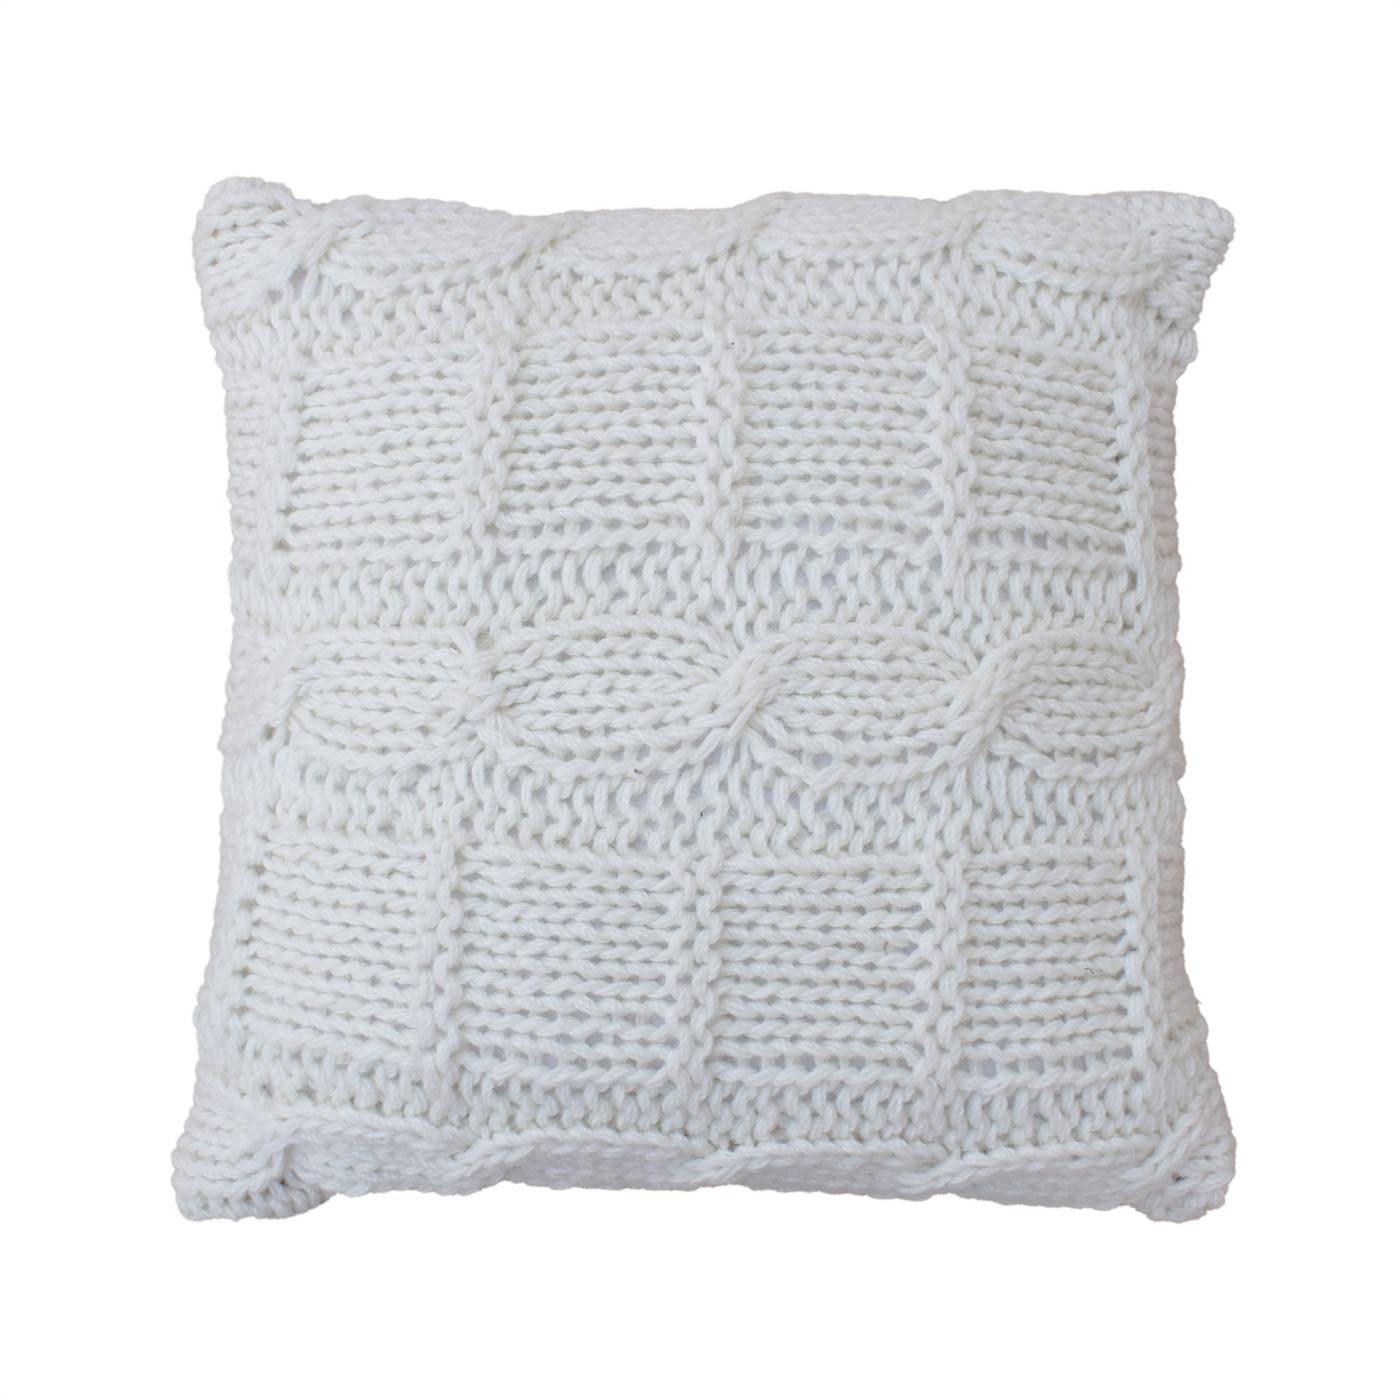 Laiban Cushion, 45x45 cm, Natural White, NZ Wool, Hand Knitted, Hm Knitted, Flat Weave